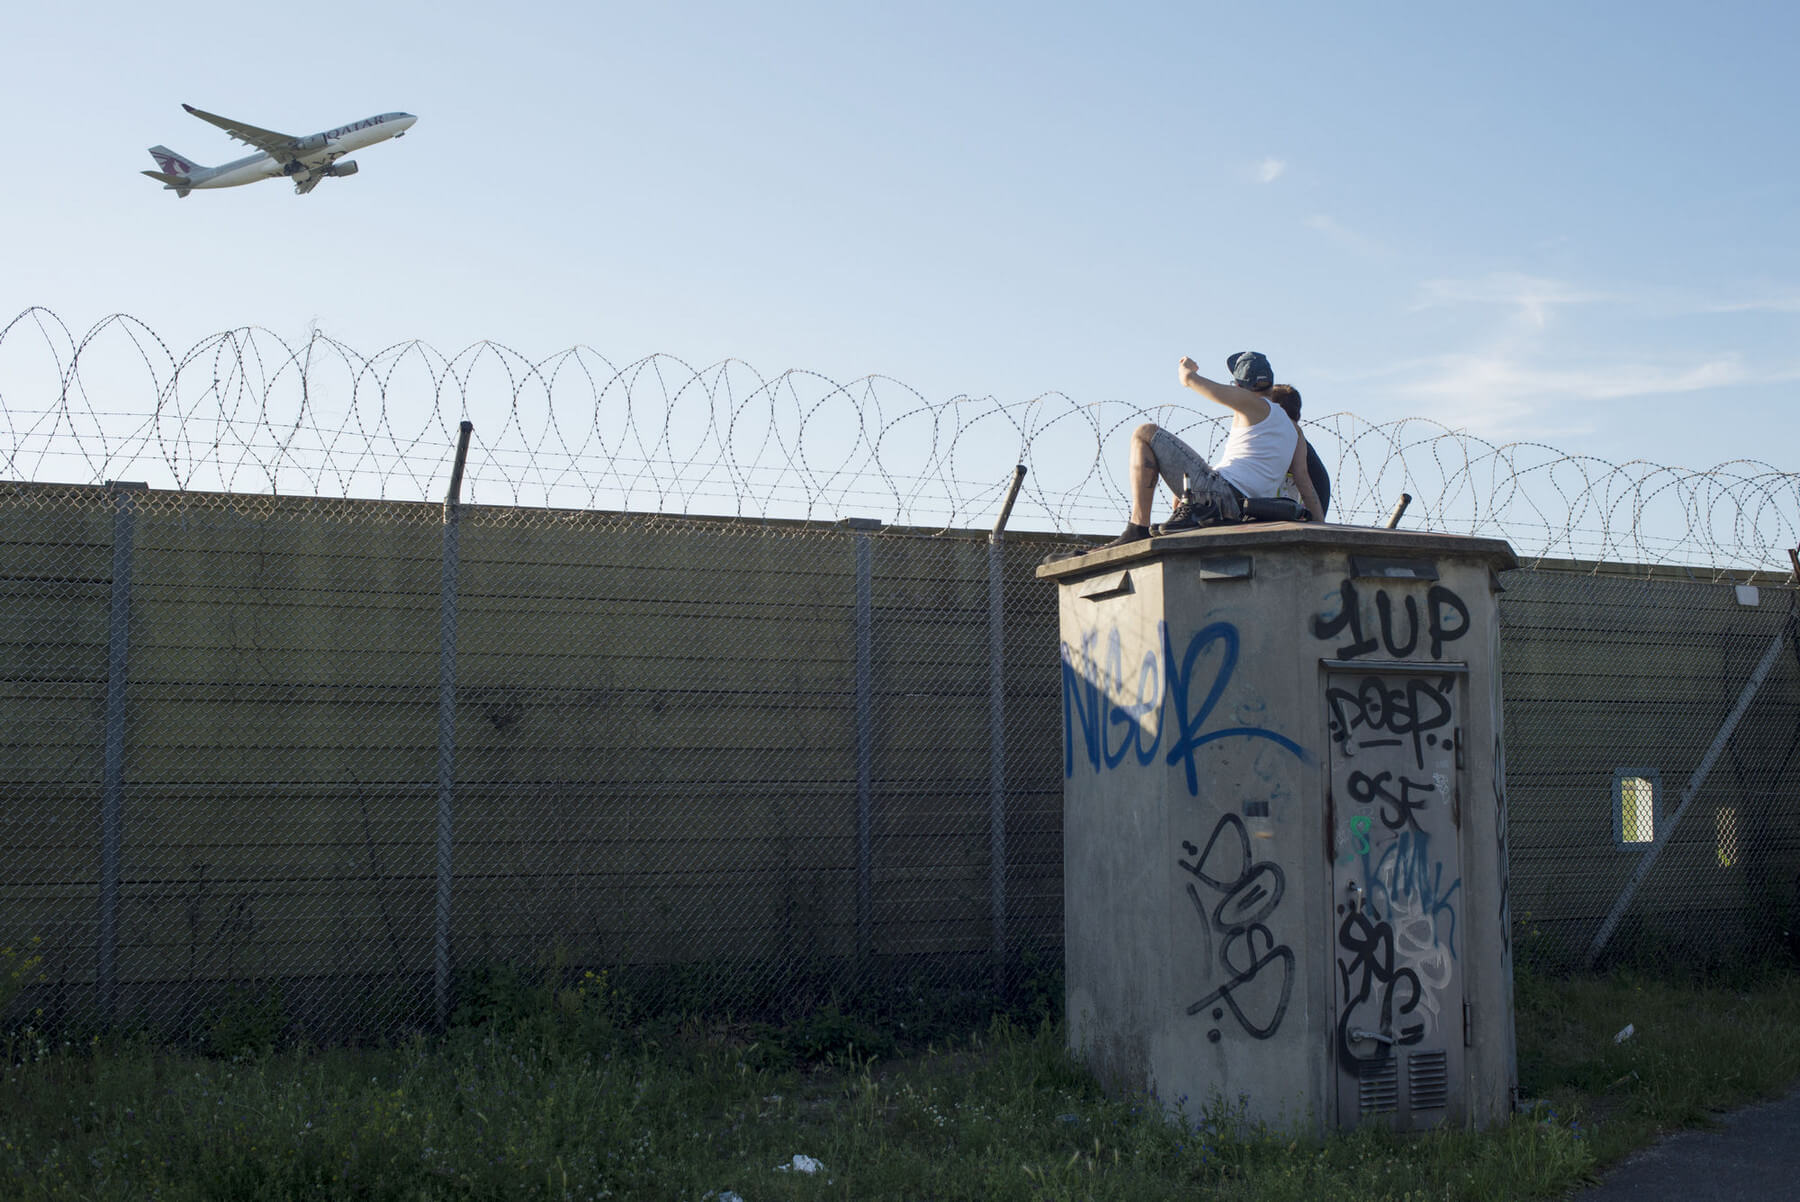 Plane-spotting on "Berlin Wall", TLX, 2016 from A-SPOT, part of t